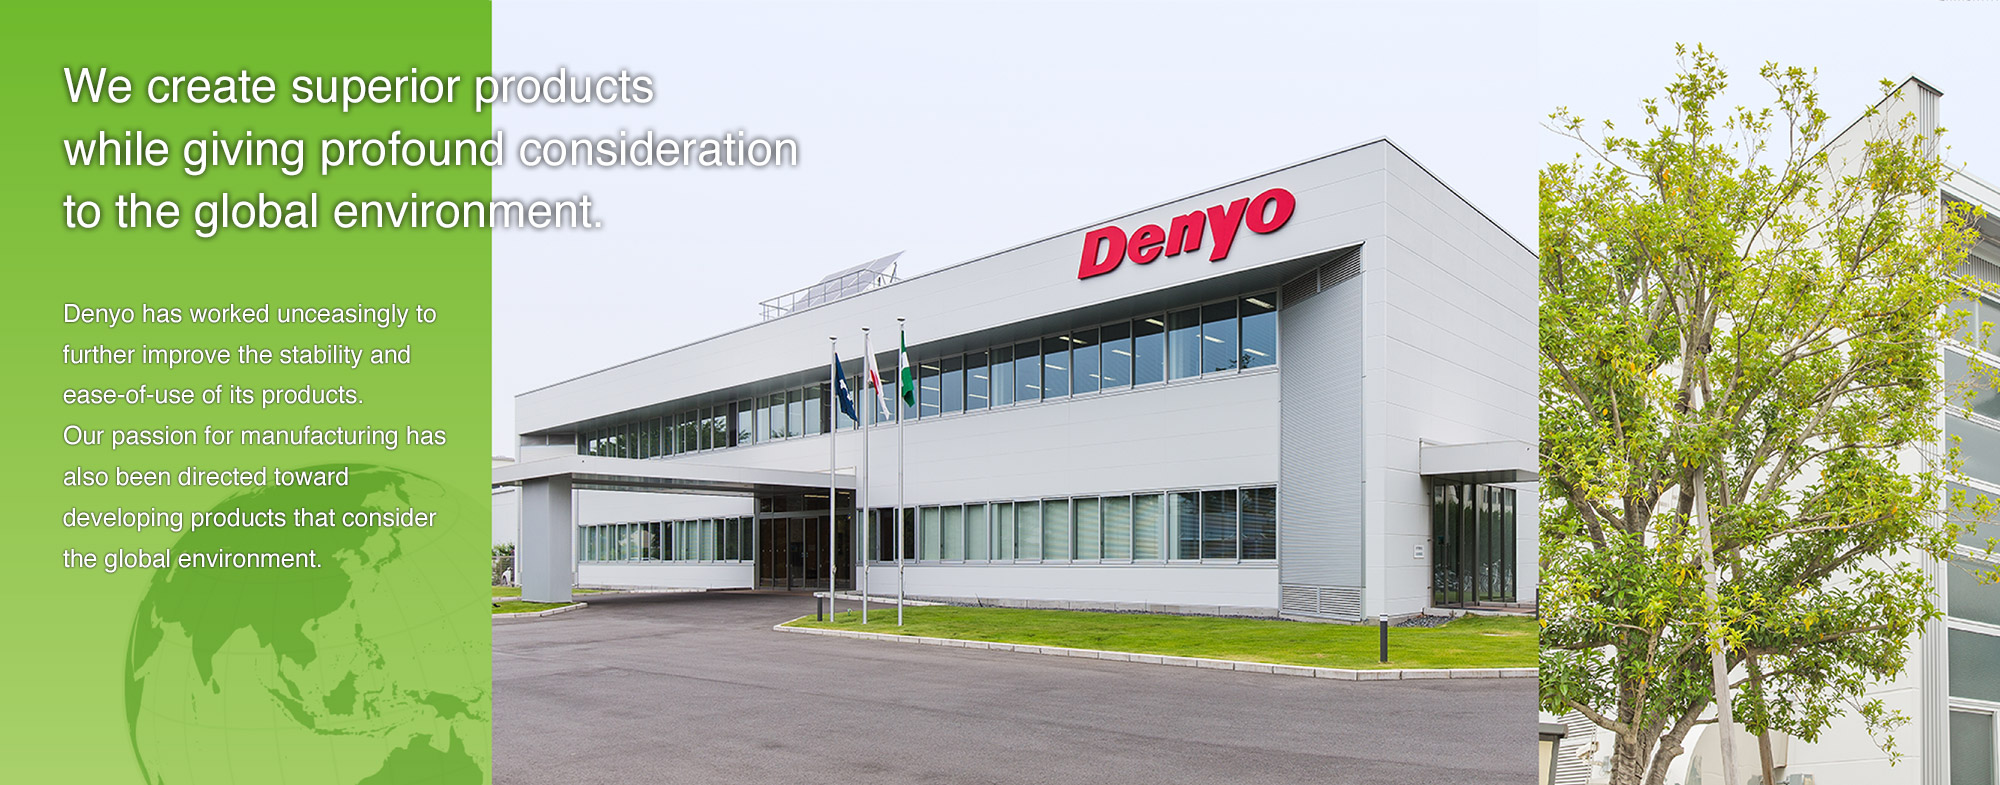 Denyo has worked unceasingly to further improve the stability and ease-of-use of its products. 
Our passion for manufacturing has also been directed toward developing products that consider the global environment. 